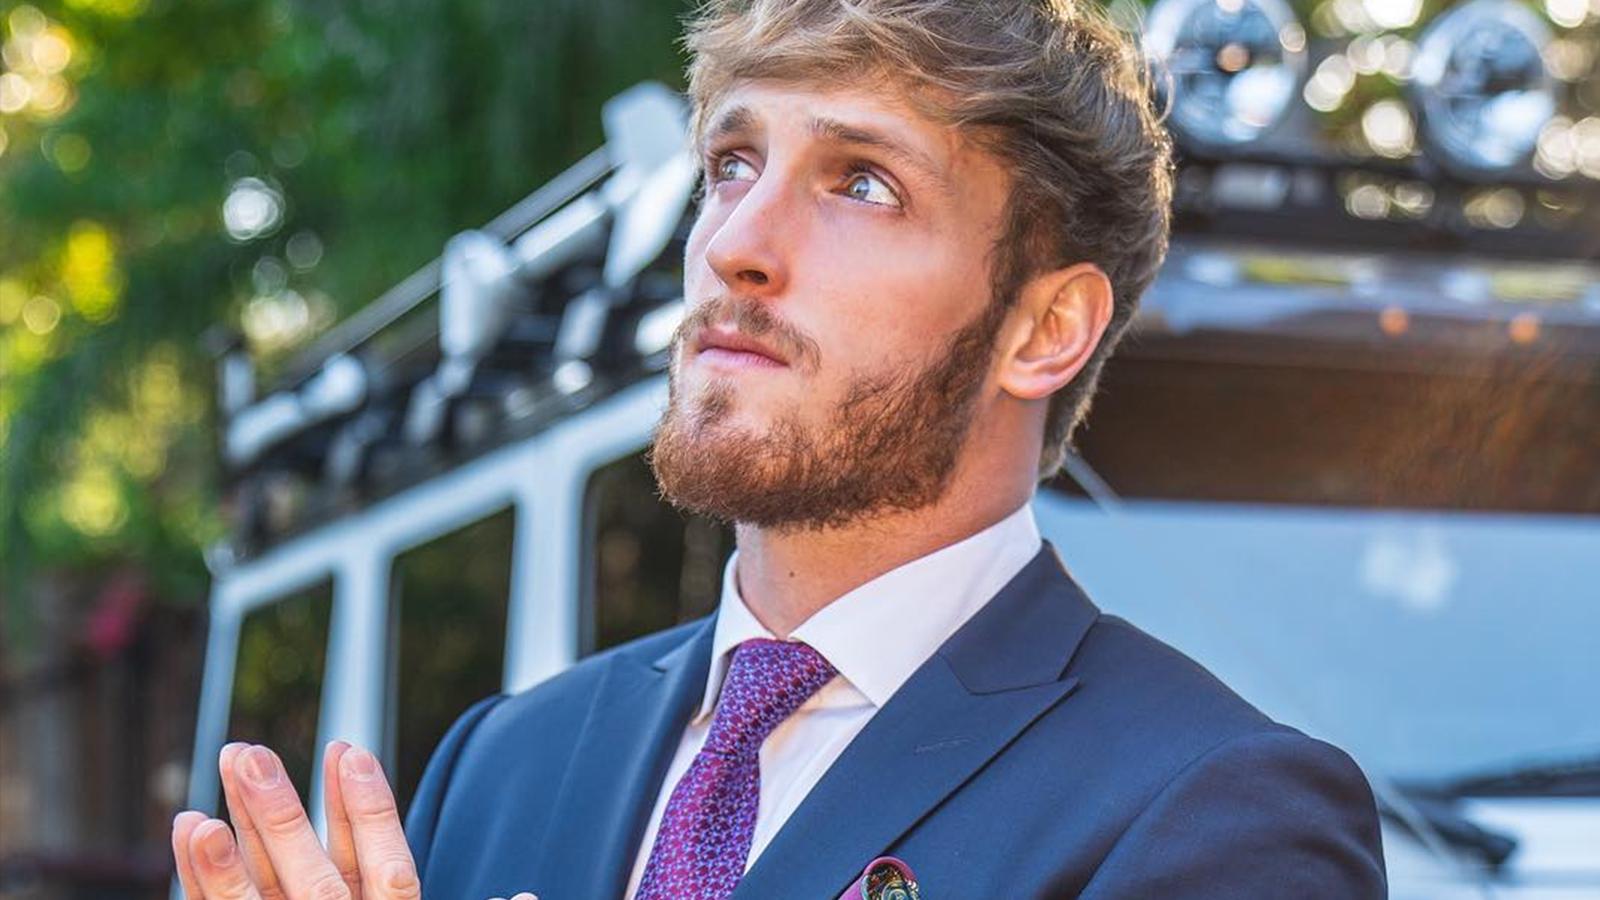 Logan Paul is currently 0–1 in his pro boxing career, but is looking to change that in 2021.